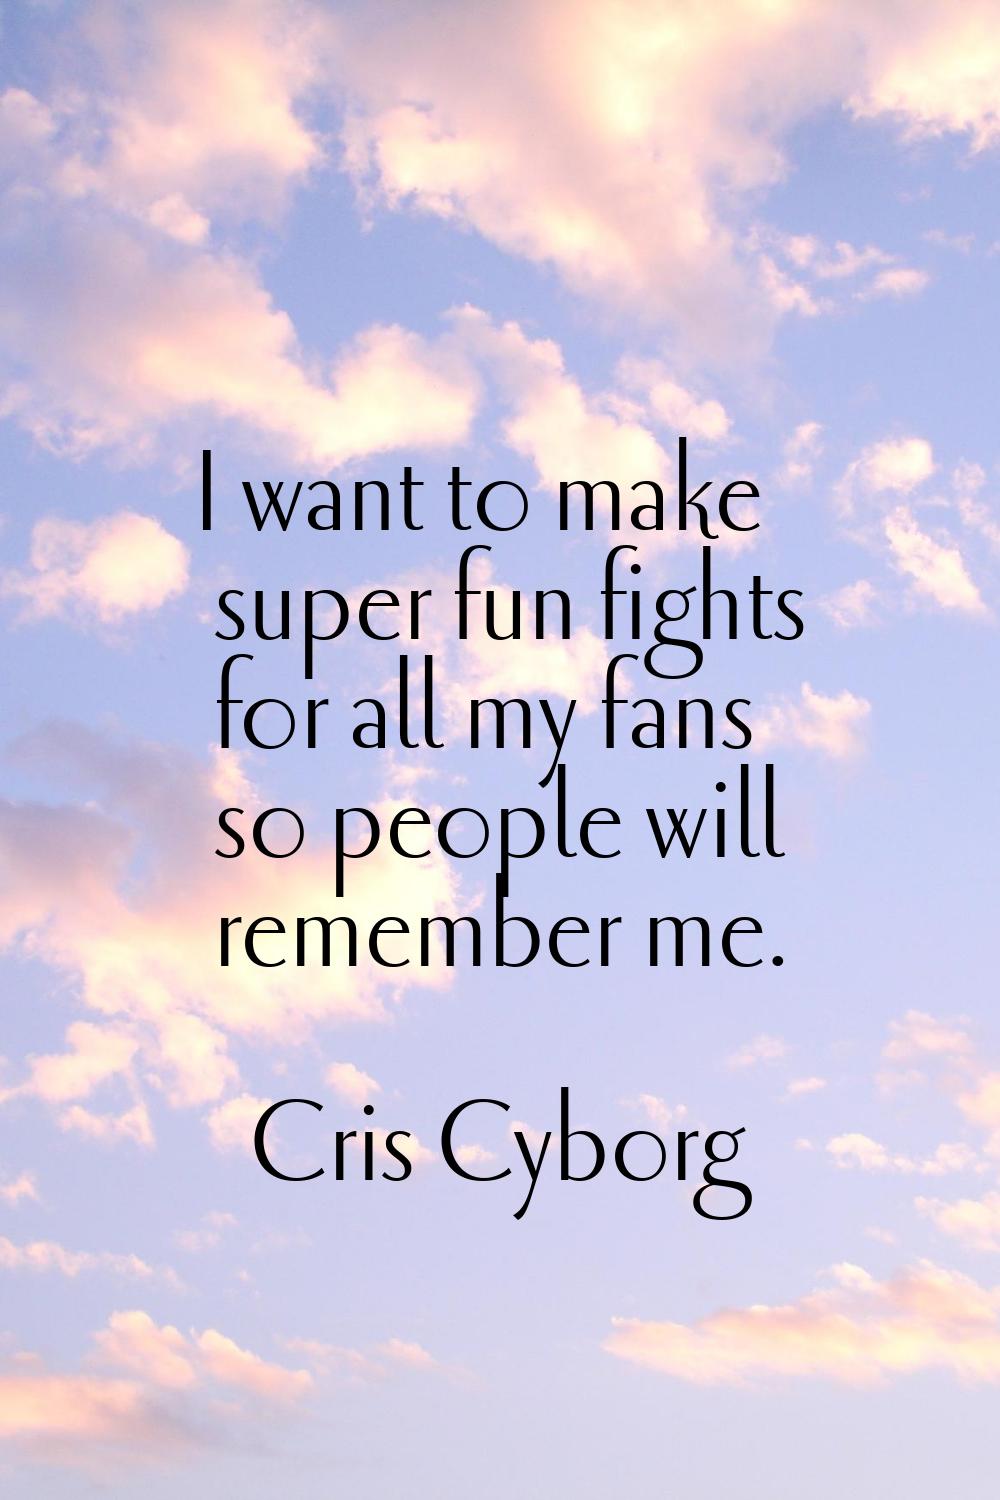 I want to make super fun fights for all my fans so people will remember me.